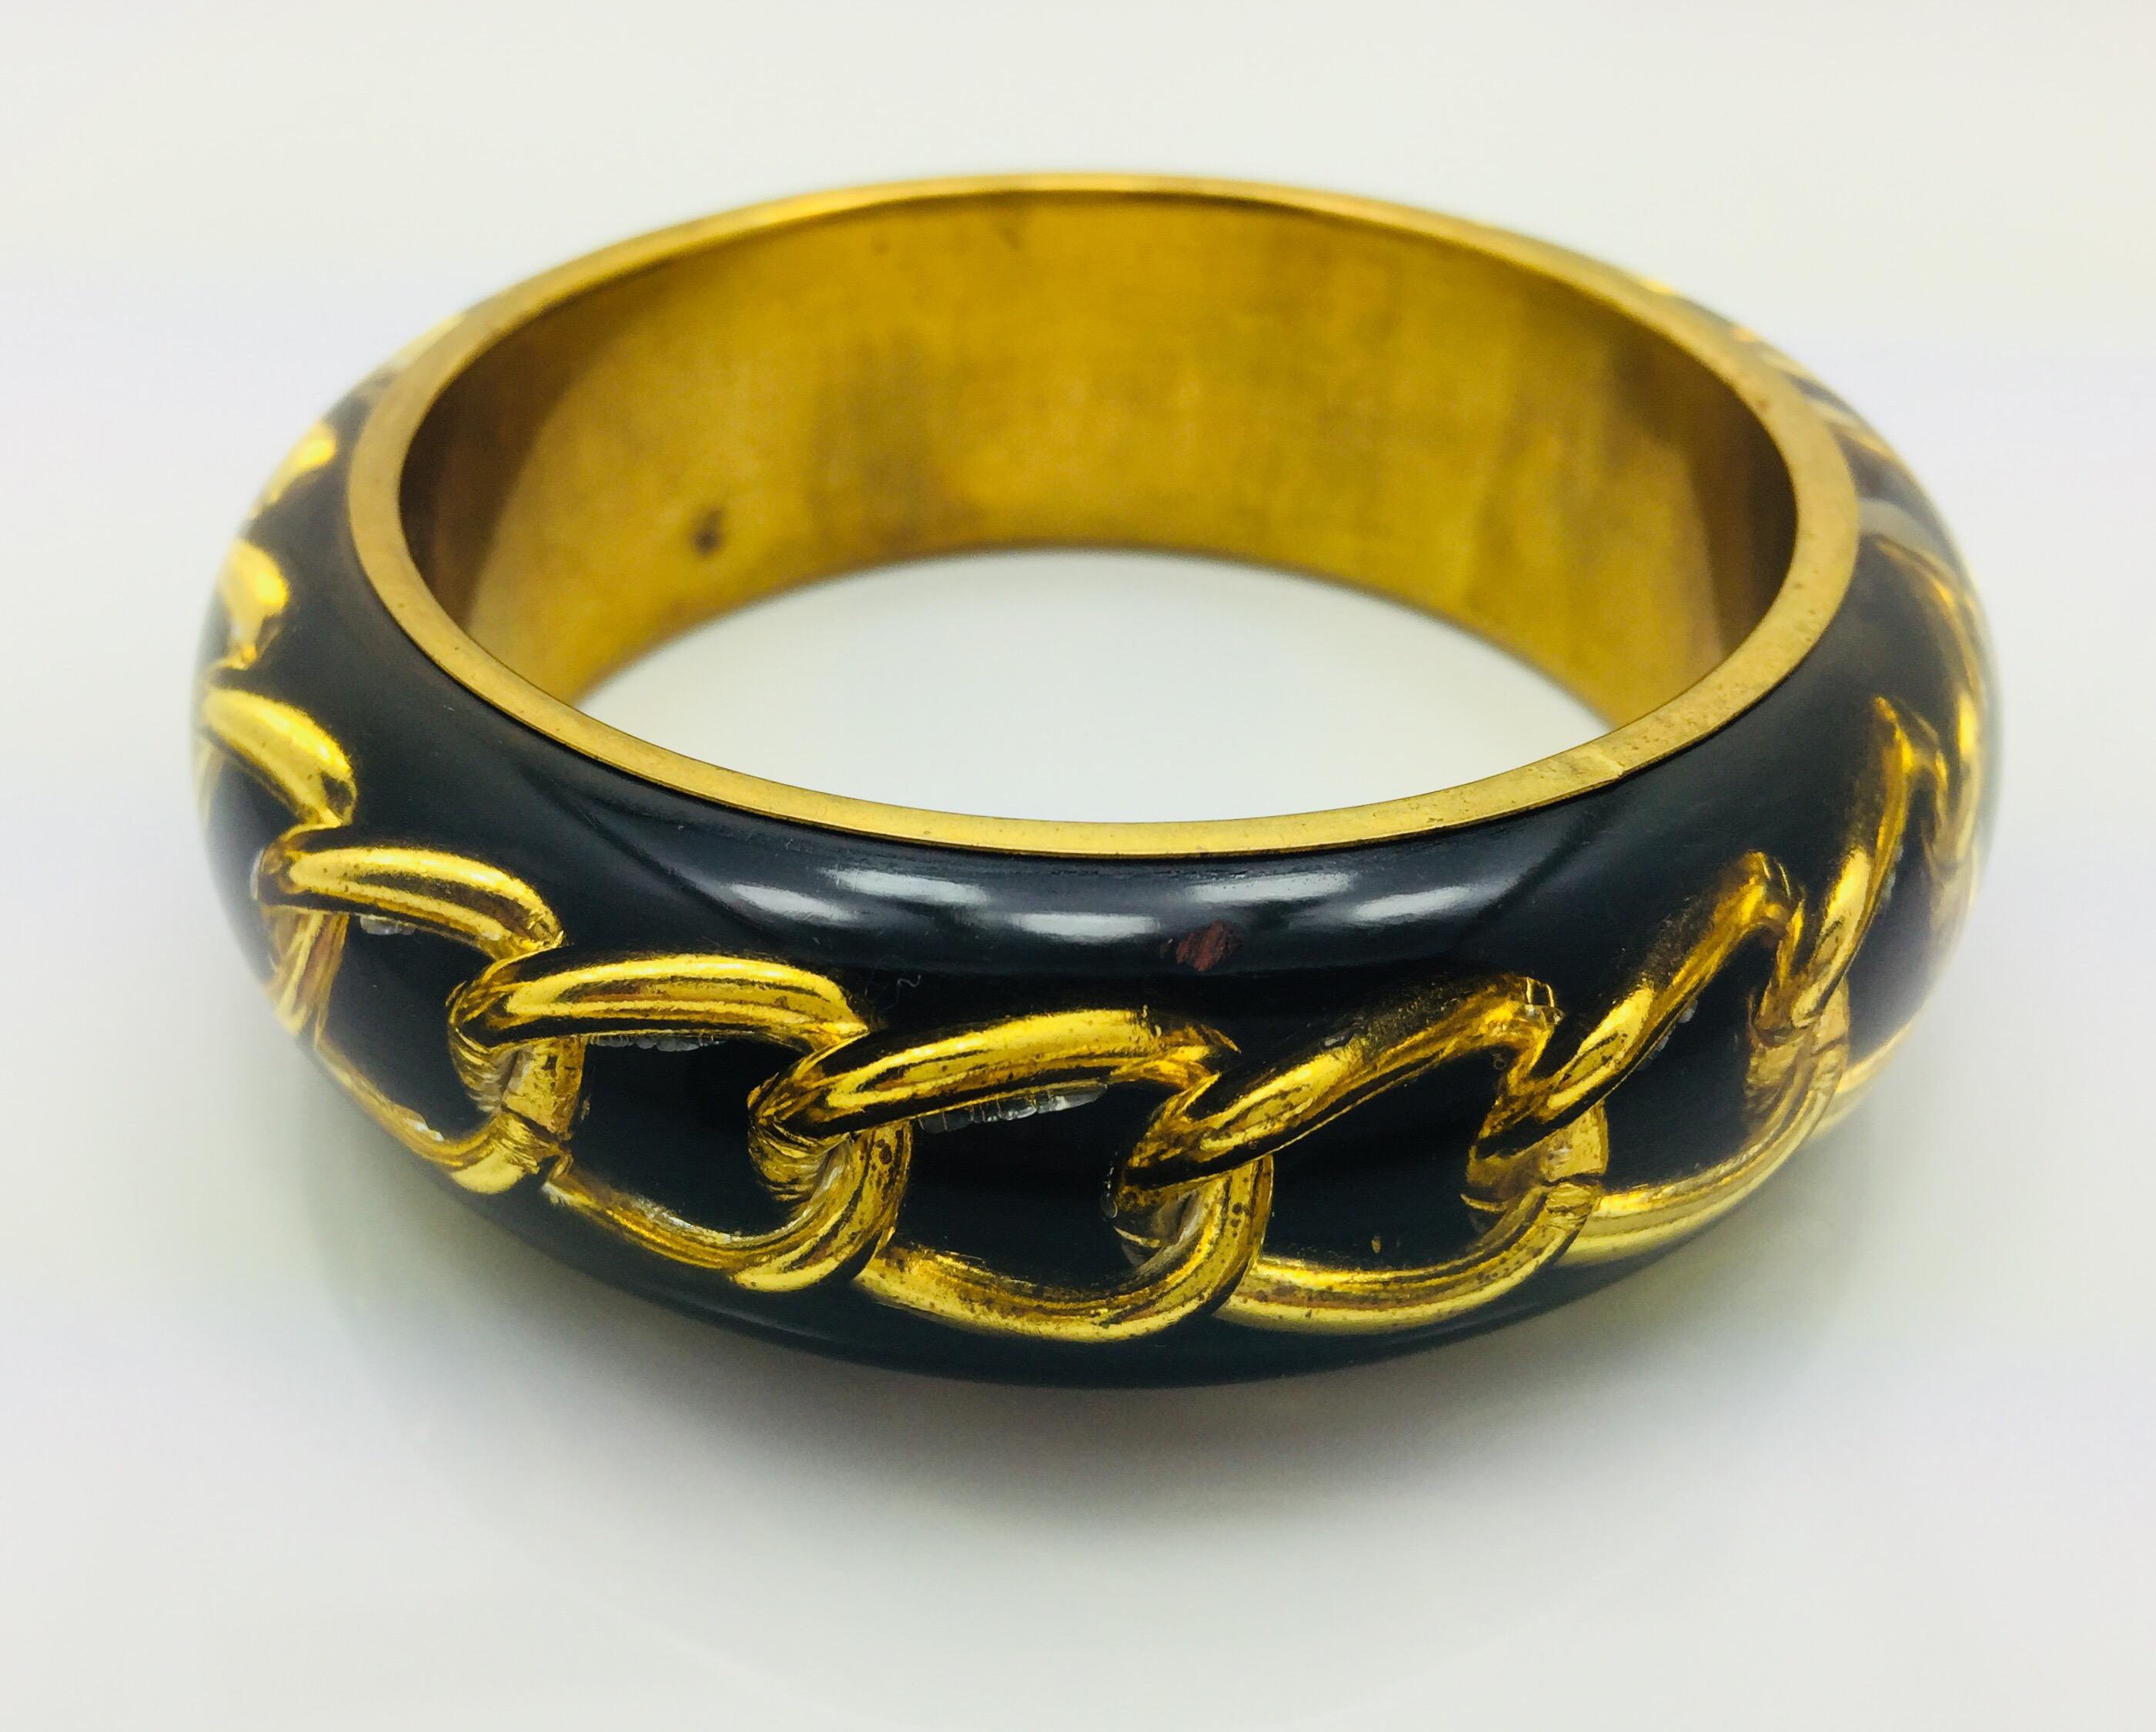 Black Resin bangle bracelet featuring inlaid gold chain. 

Measurements : total diameter approx. 9.1 cm (3.58 inches) / inner diameter approx. 6.4 cm (2.52 inches) / thickness approx. 0.9 cm (0.35 inch).

FOLLOW  MEGHNA JEWELS storefront to view the